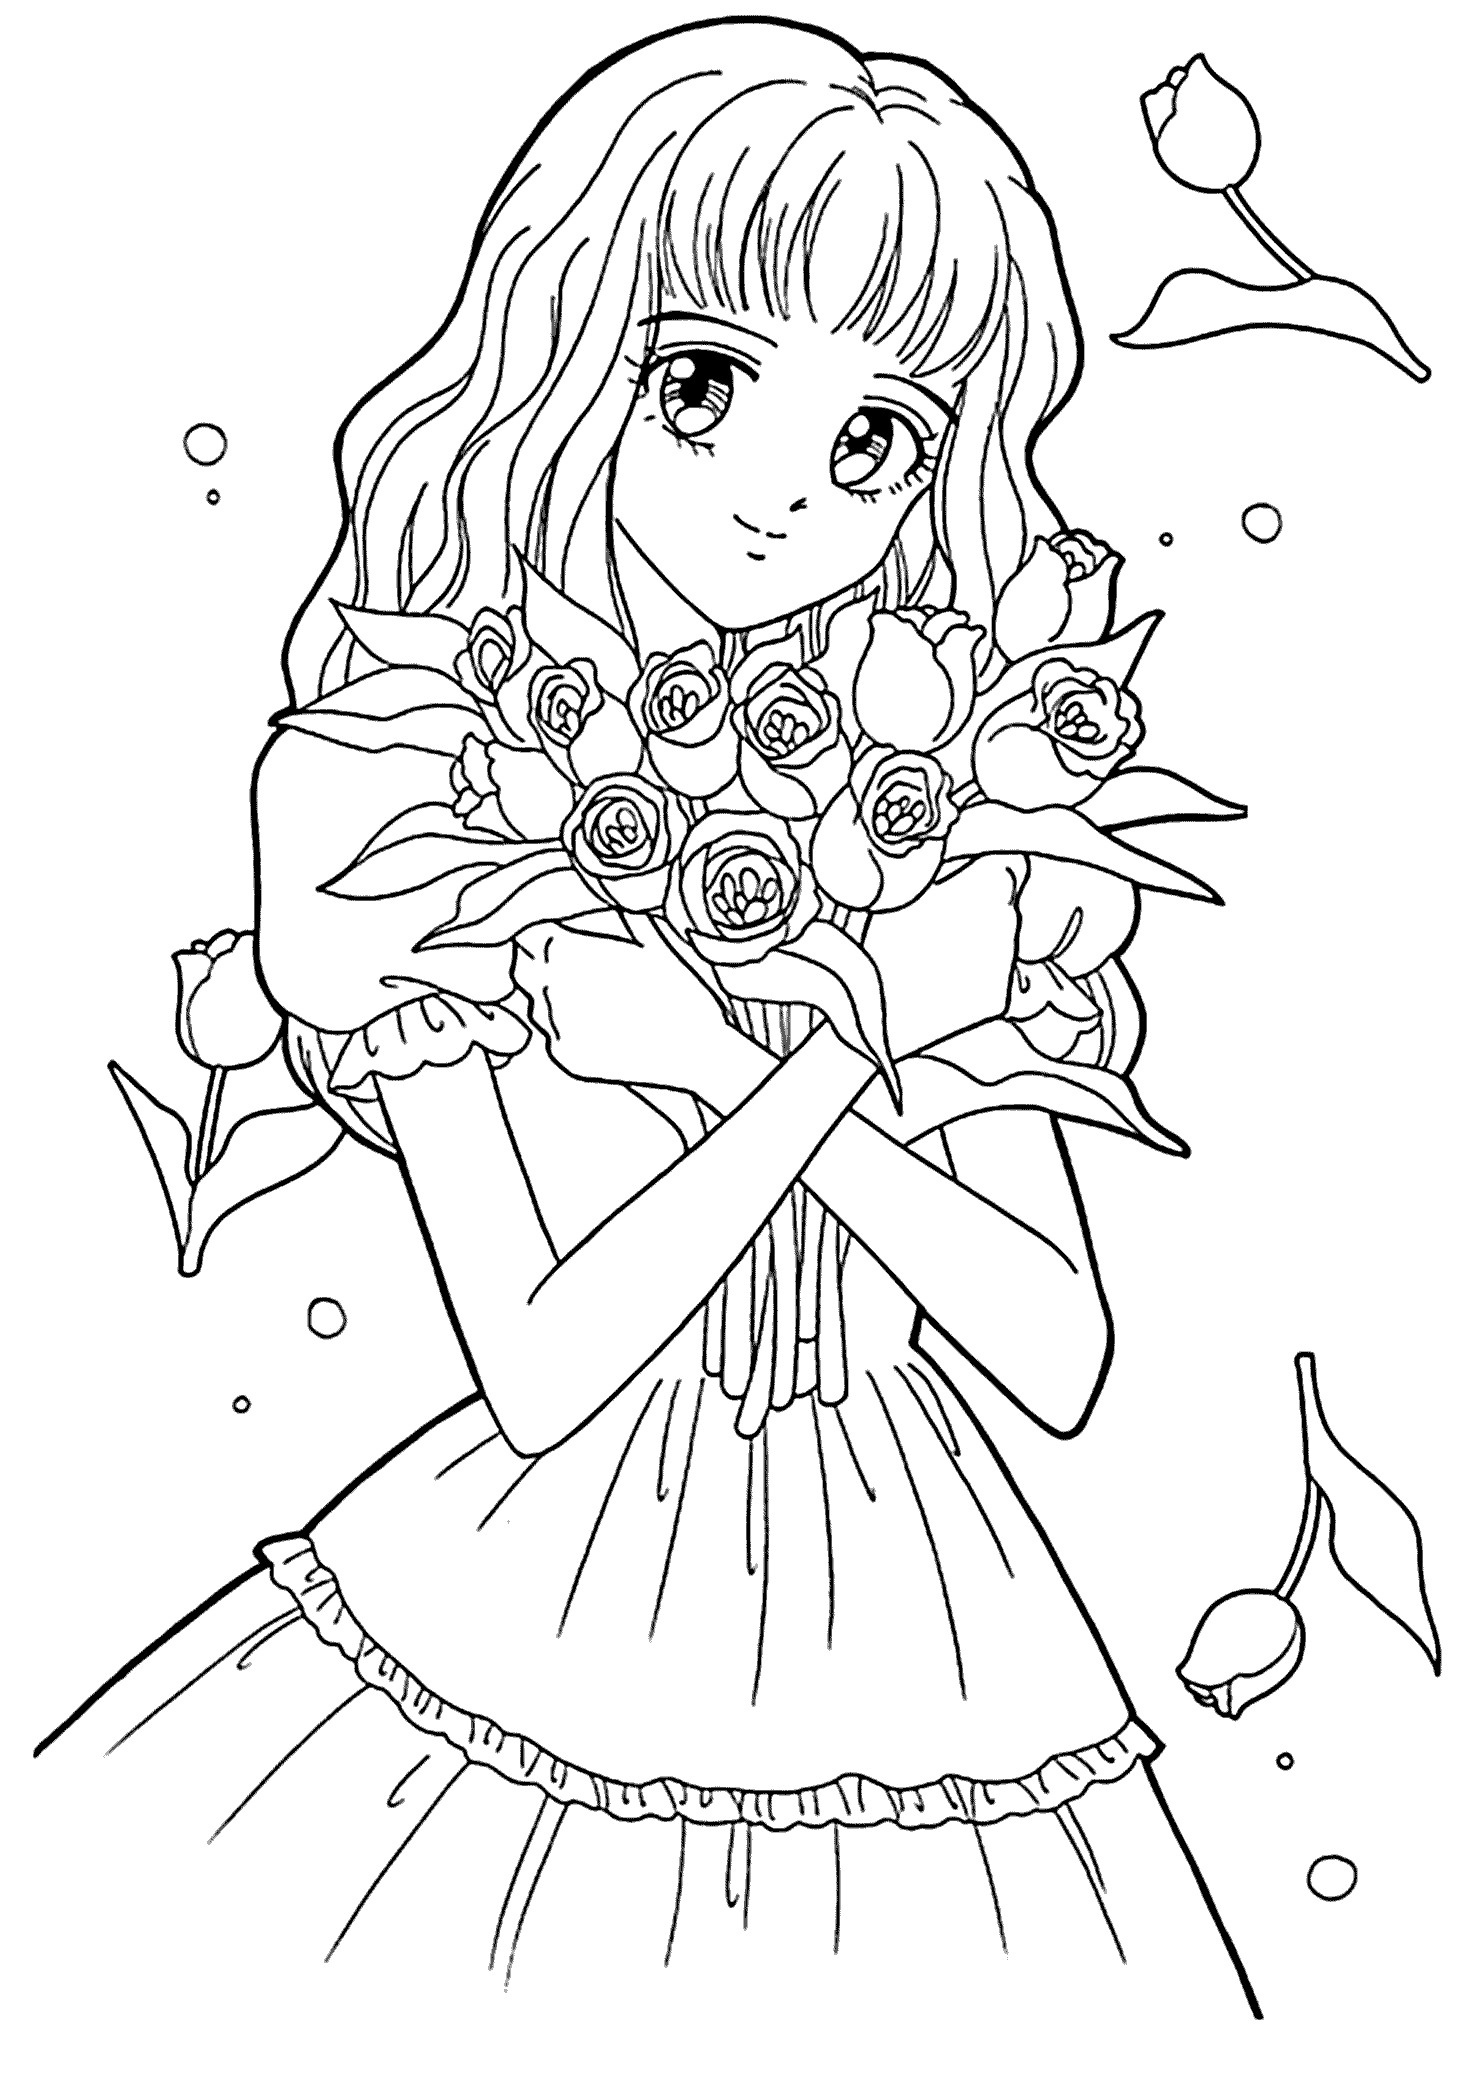 Coloring Pages For Girls Teens
 Best Free Printable Coloring Pages for Kids and Teens